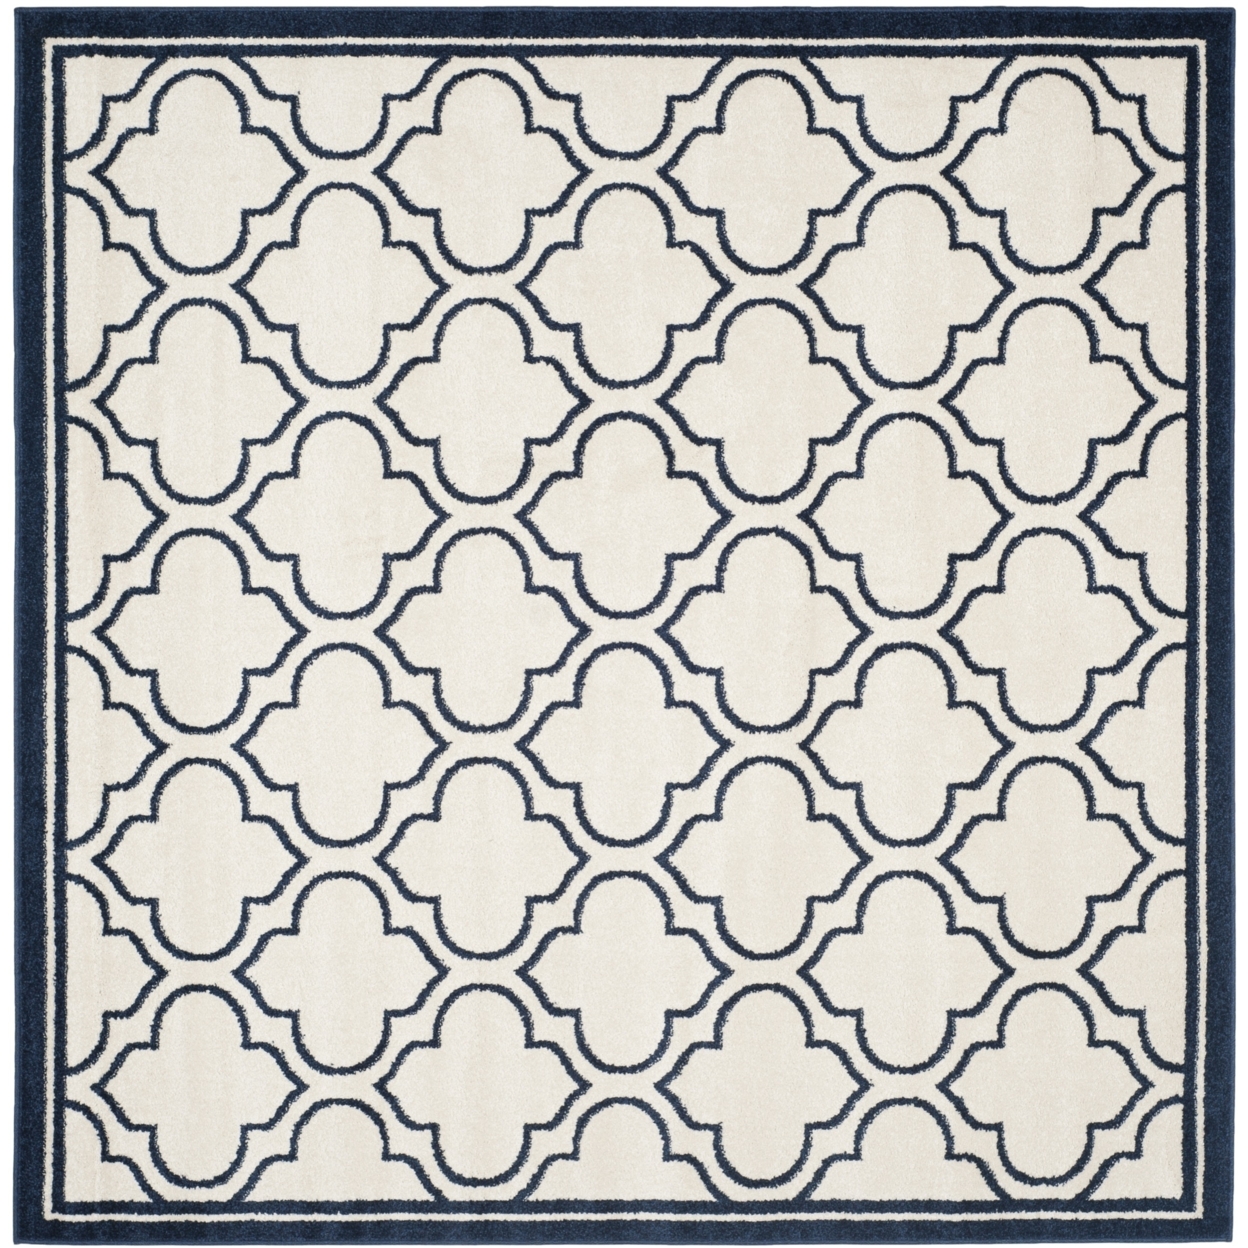 SAFAVIEH Amherst Collection AMT412M Ivory / Navy Rug - 7' Square